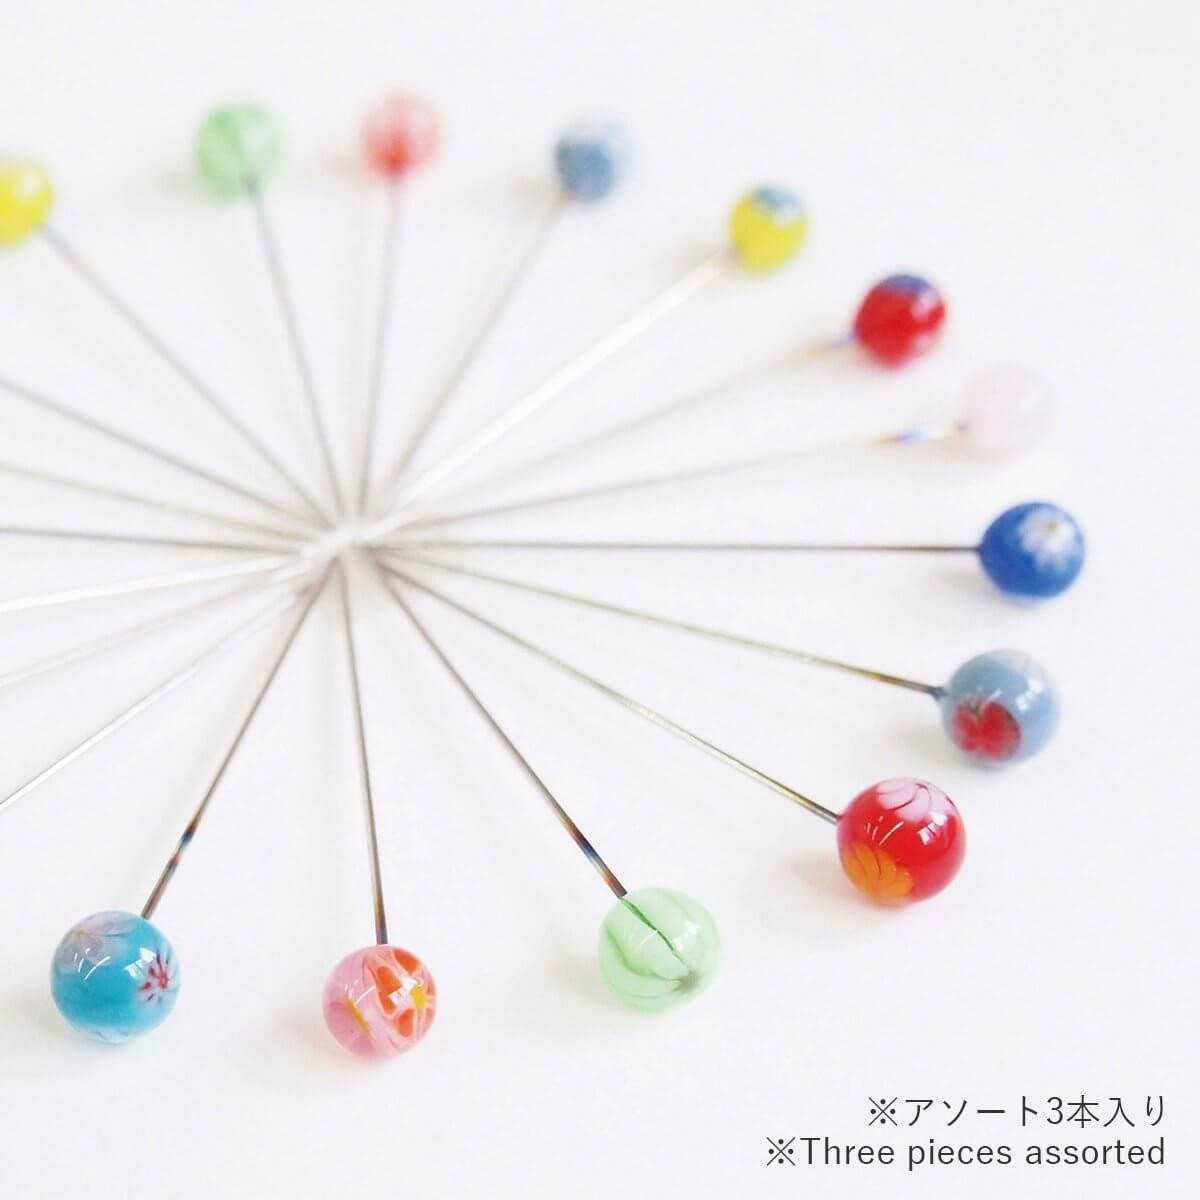 TOMBO-DAMA SEWING PINS | Assorted Glass